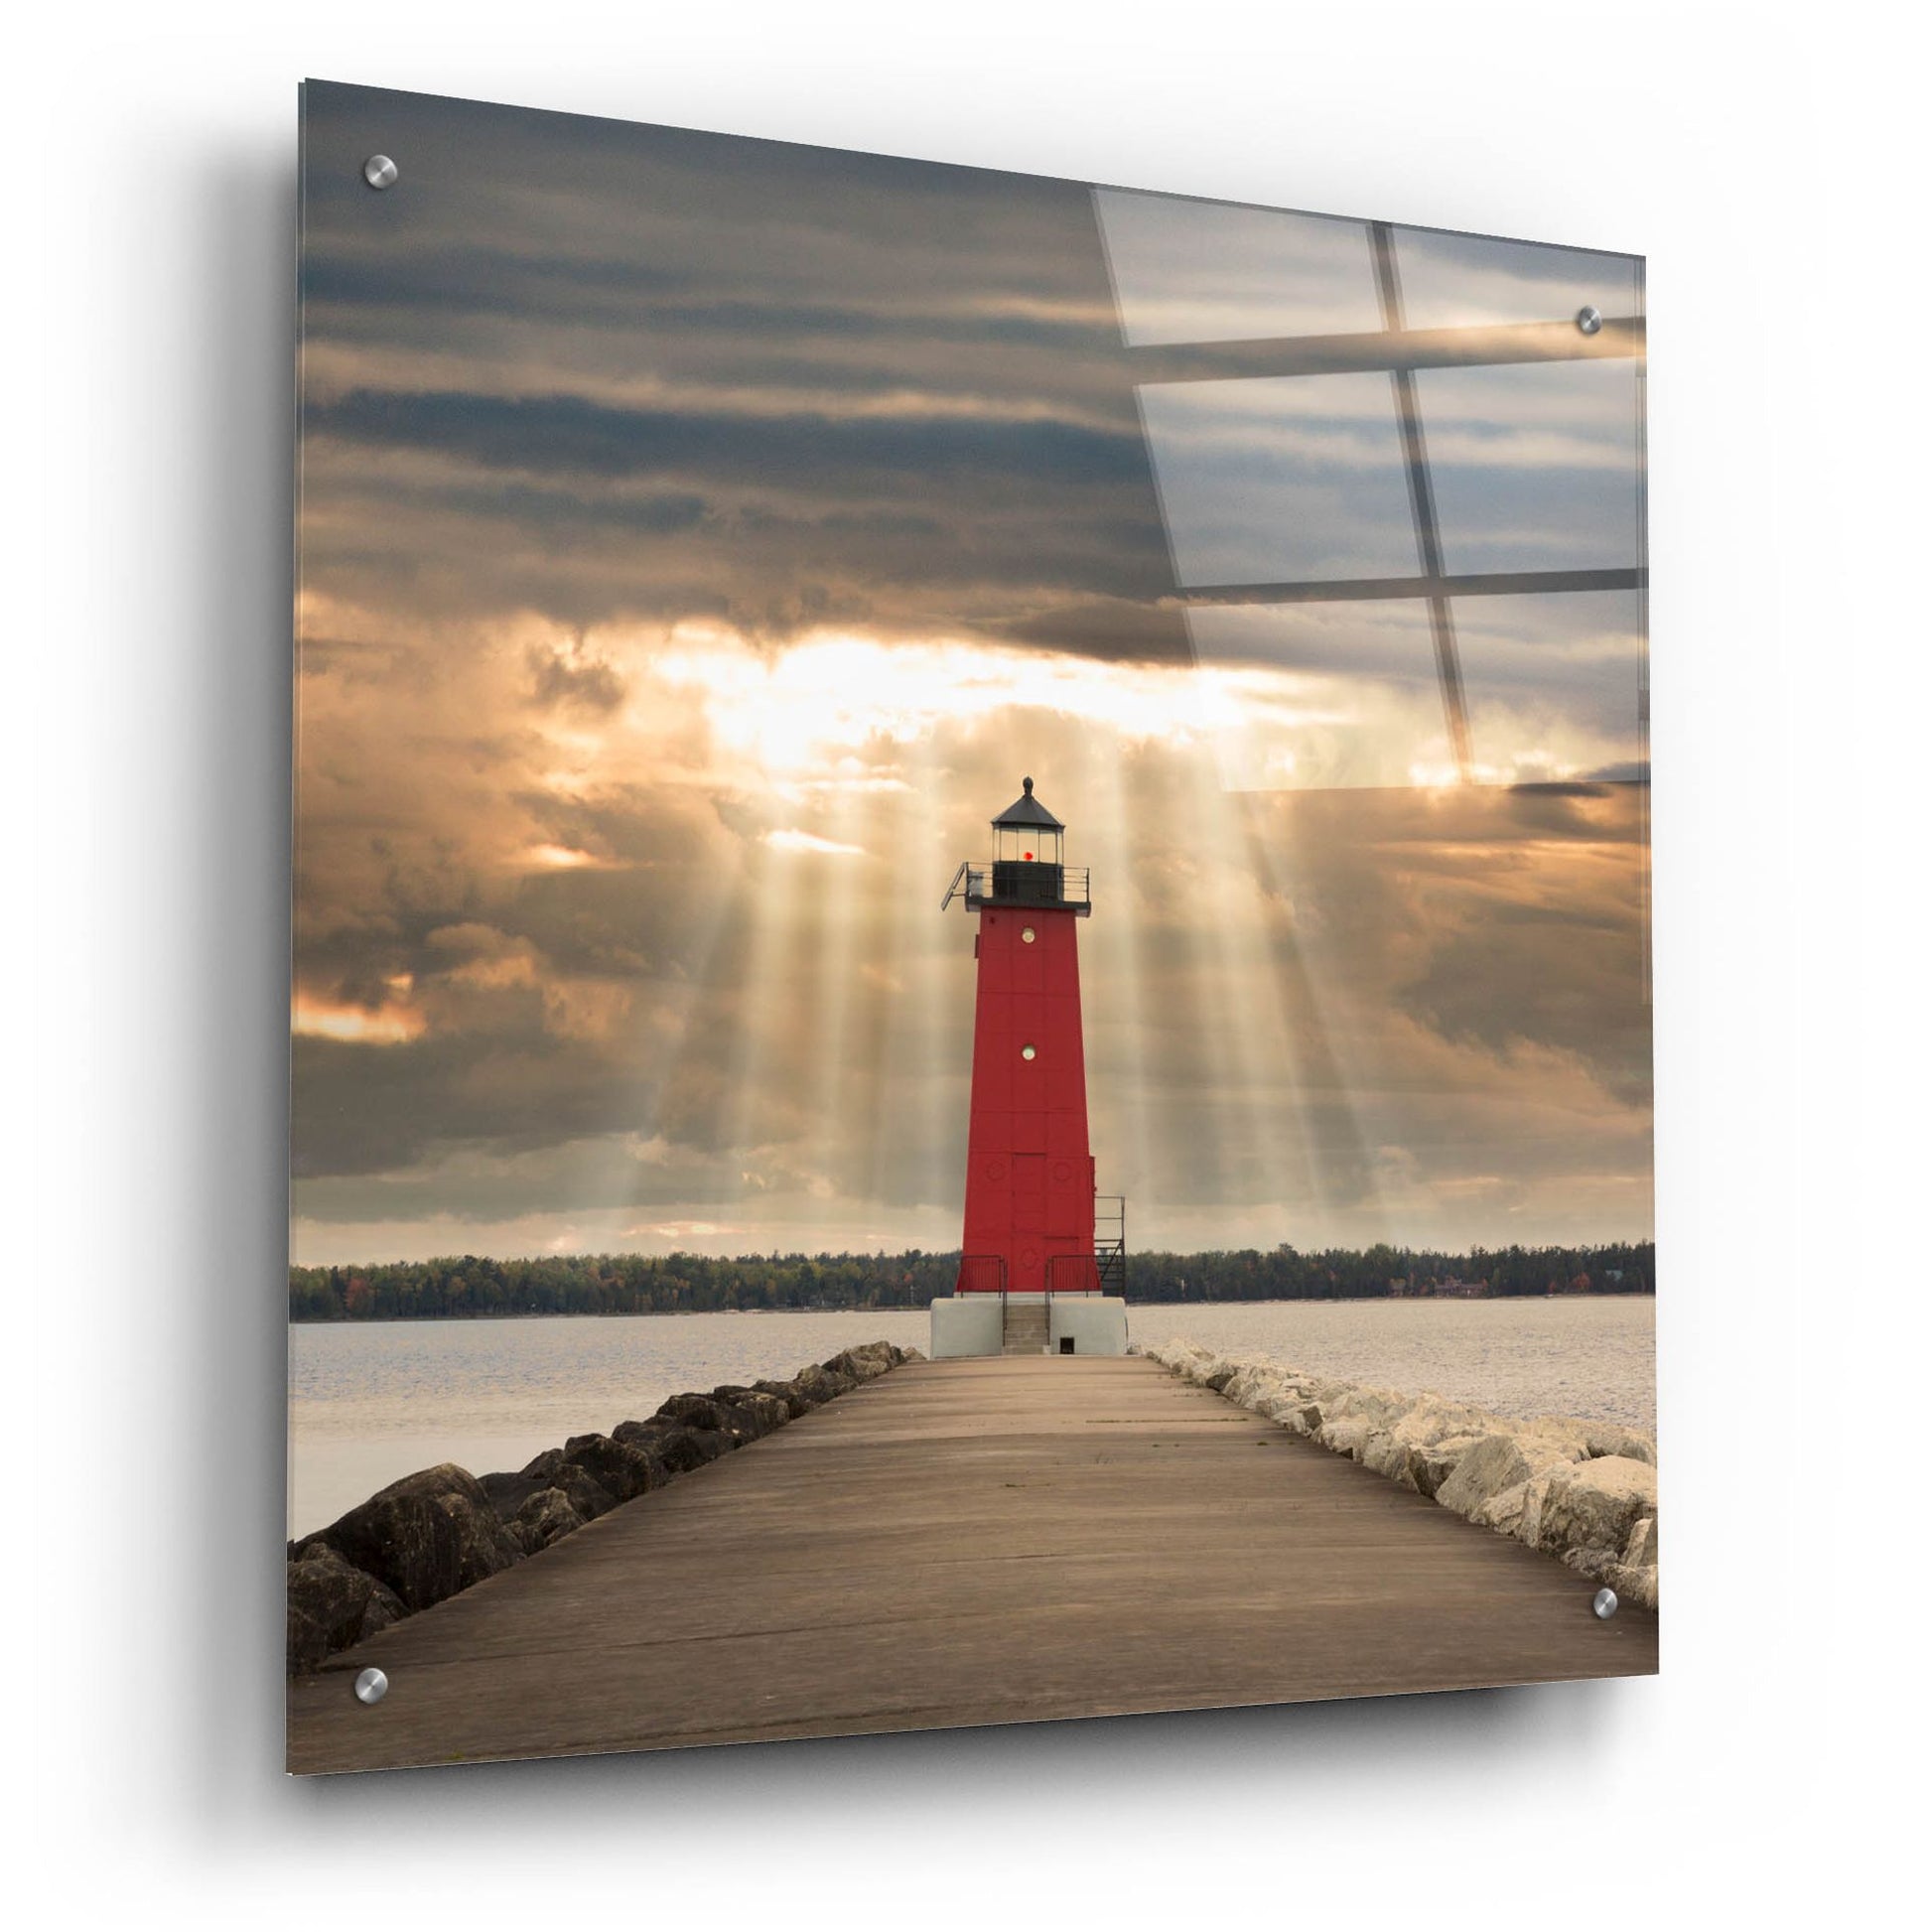 Epic Art 'Manistique Lighthouse & Sunbeams, Michigan 14' by Monte Nagler, Acrylic Glass Wall Art,24x24